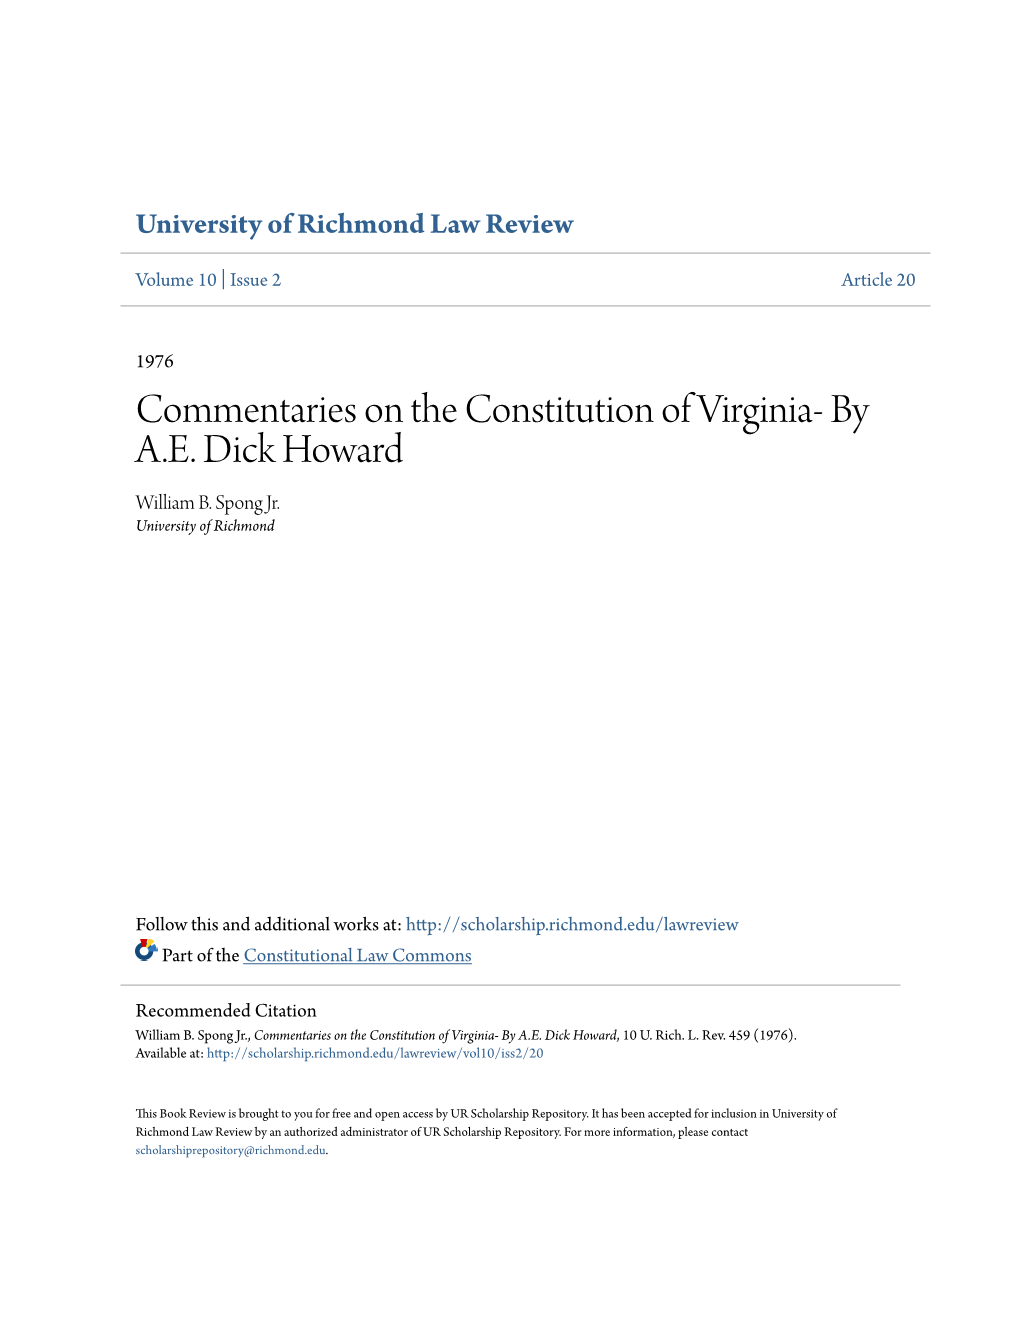 Commentaries on the Constitution of Virginia- by A.E. Dick Howard William B